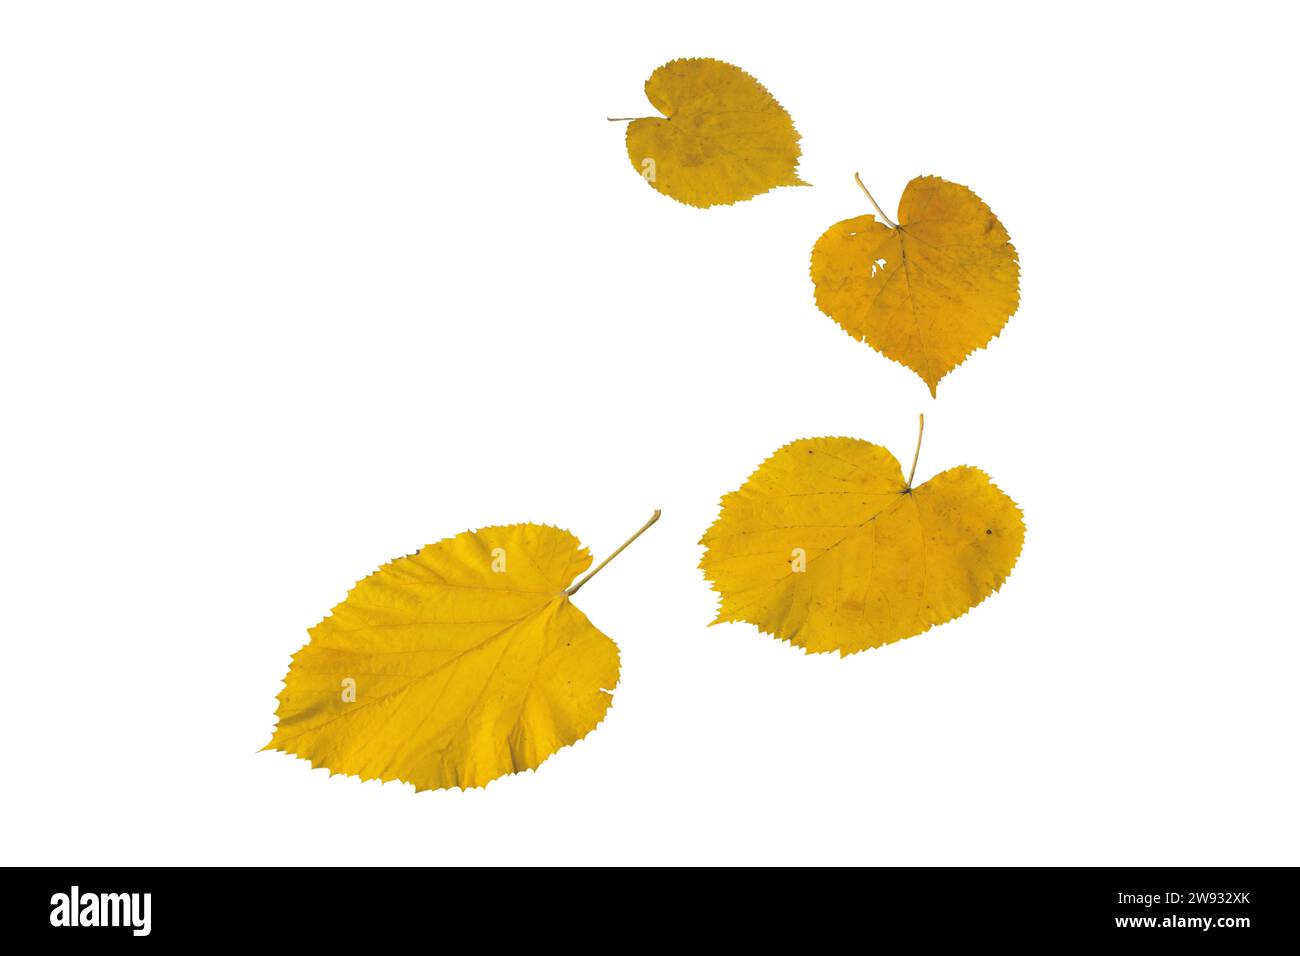 Fallen yellow linden tree leaves isolated on white. Autumn season flying lime-tree heart shaped foliage. Stock Photo